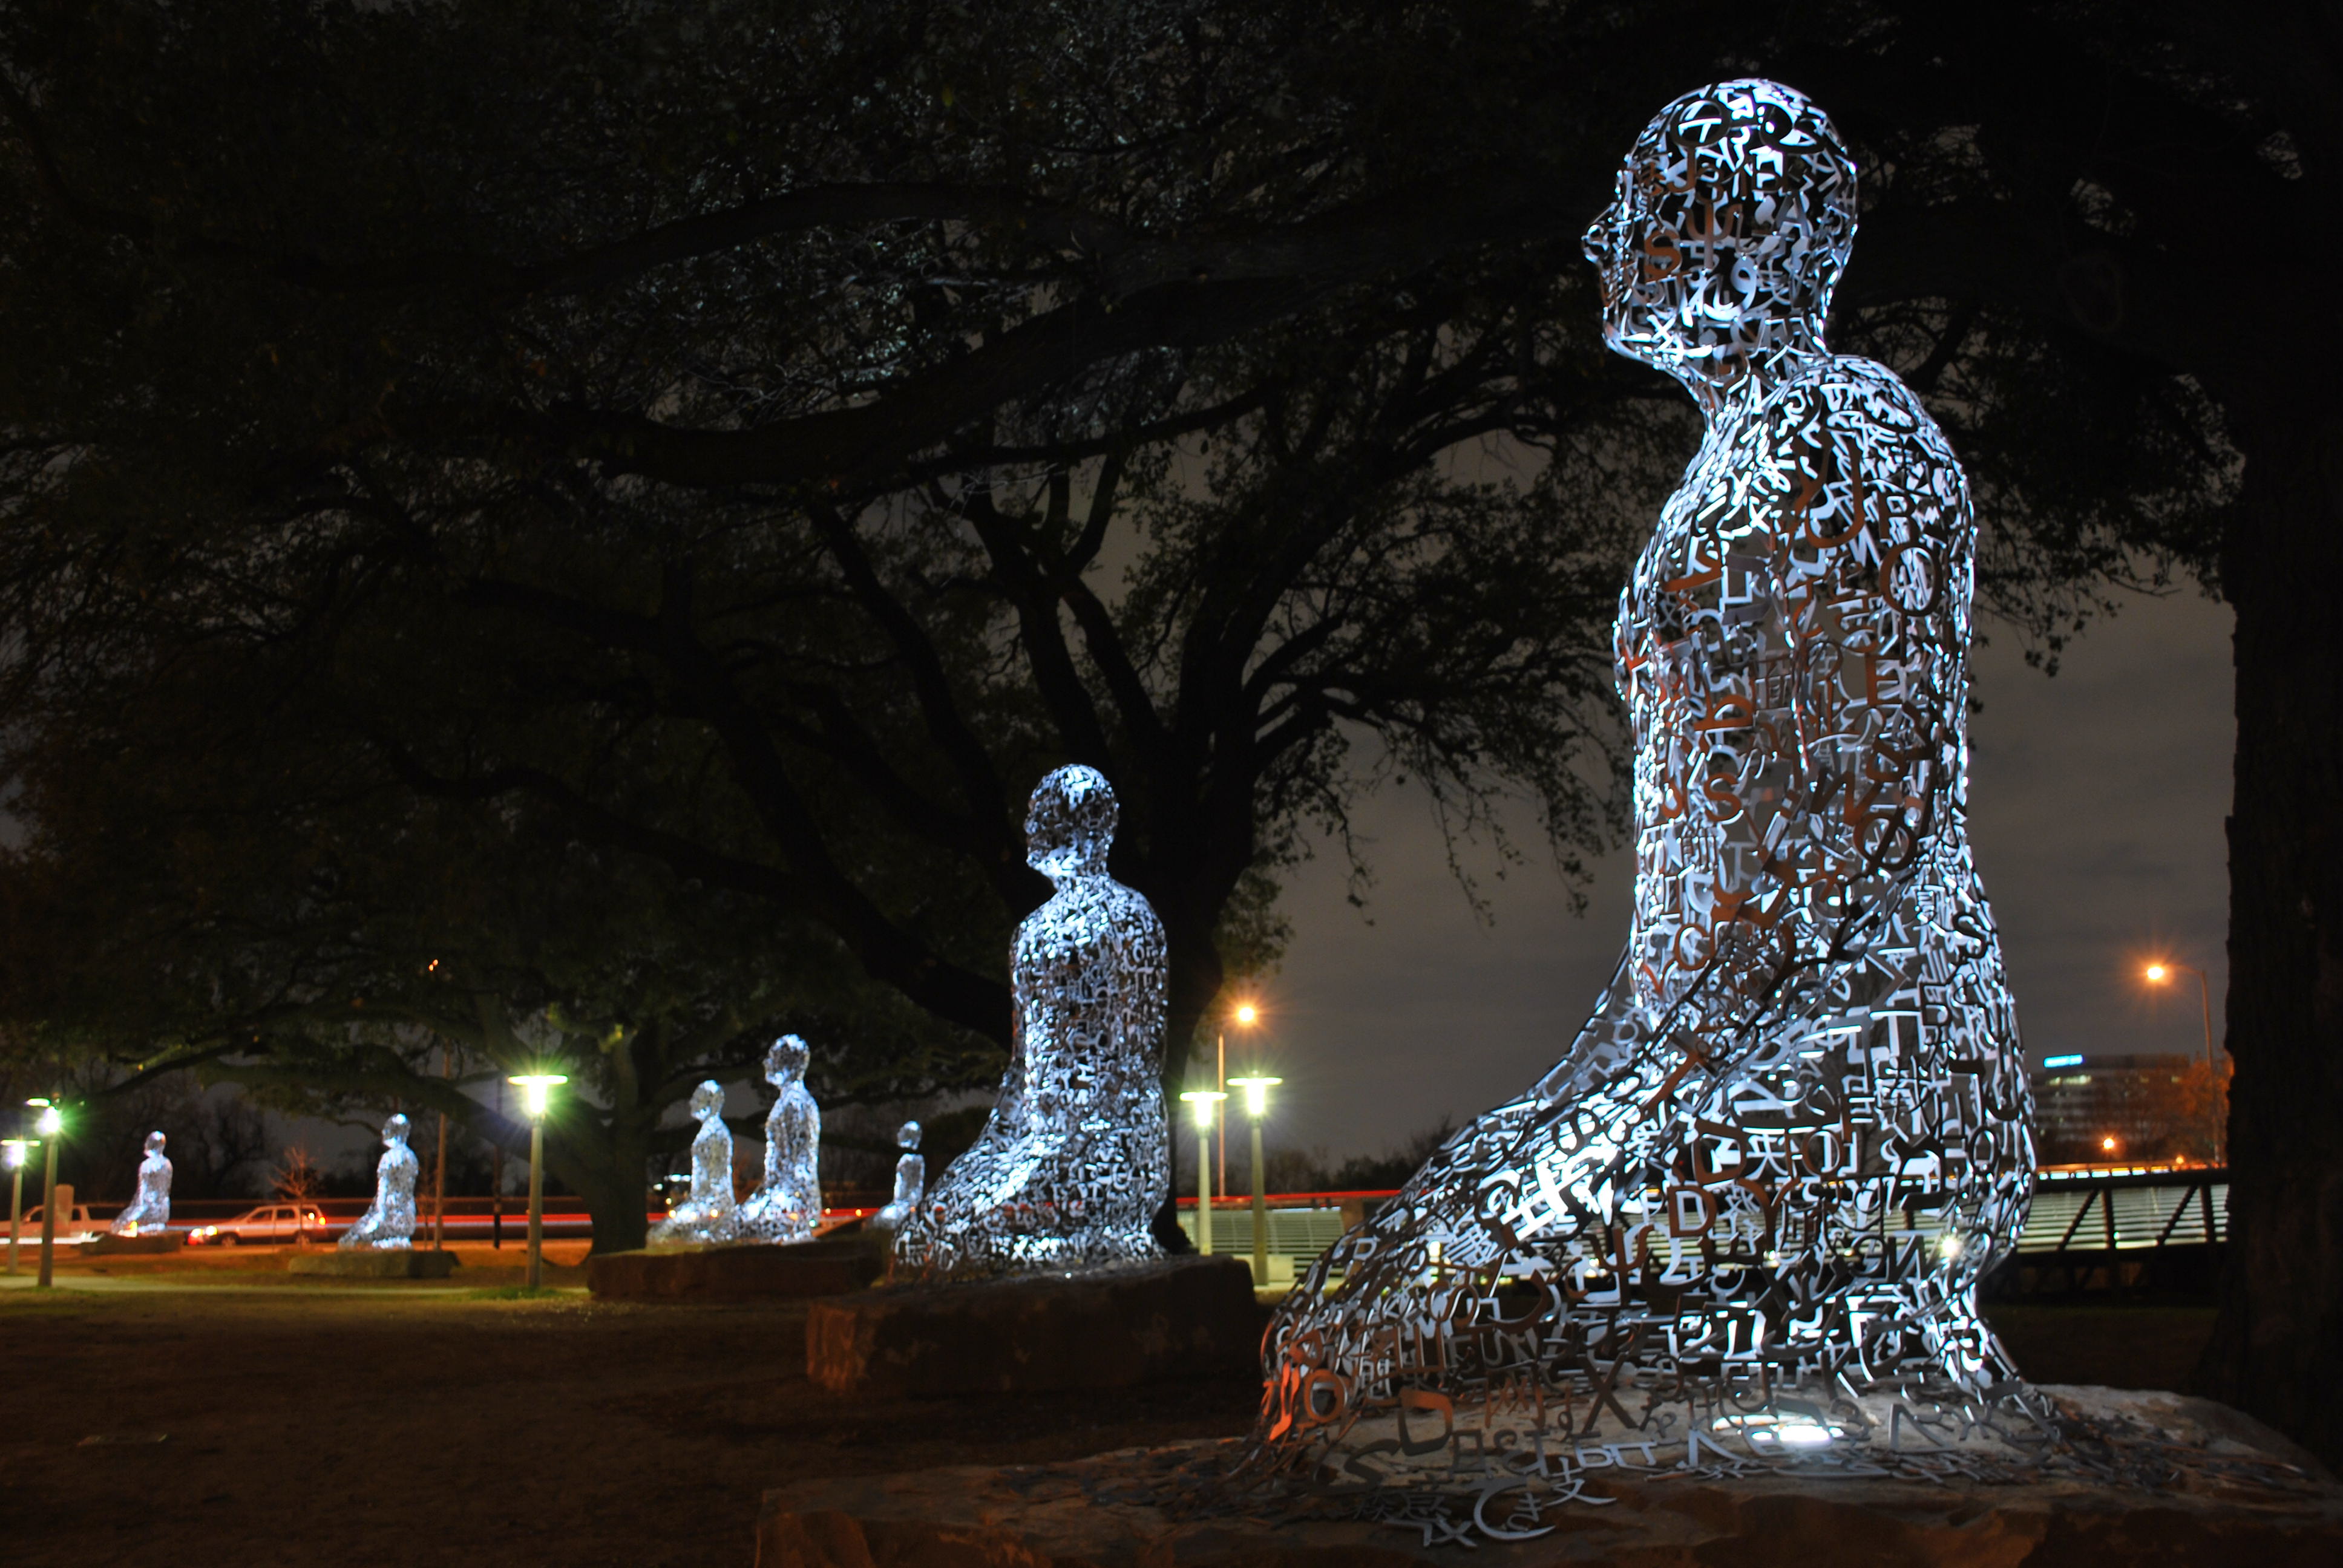 A view of the Tolerance sculptures along Allen Parkway at night time. Photo: Zahid Alibhai